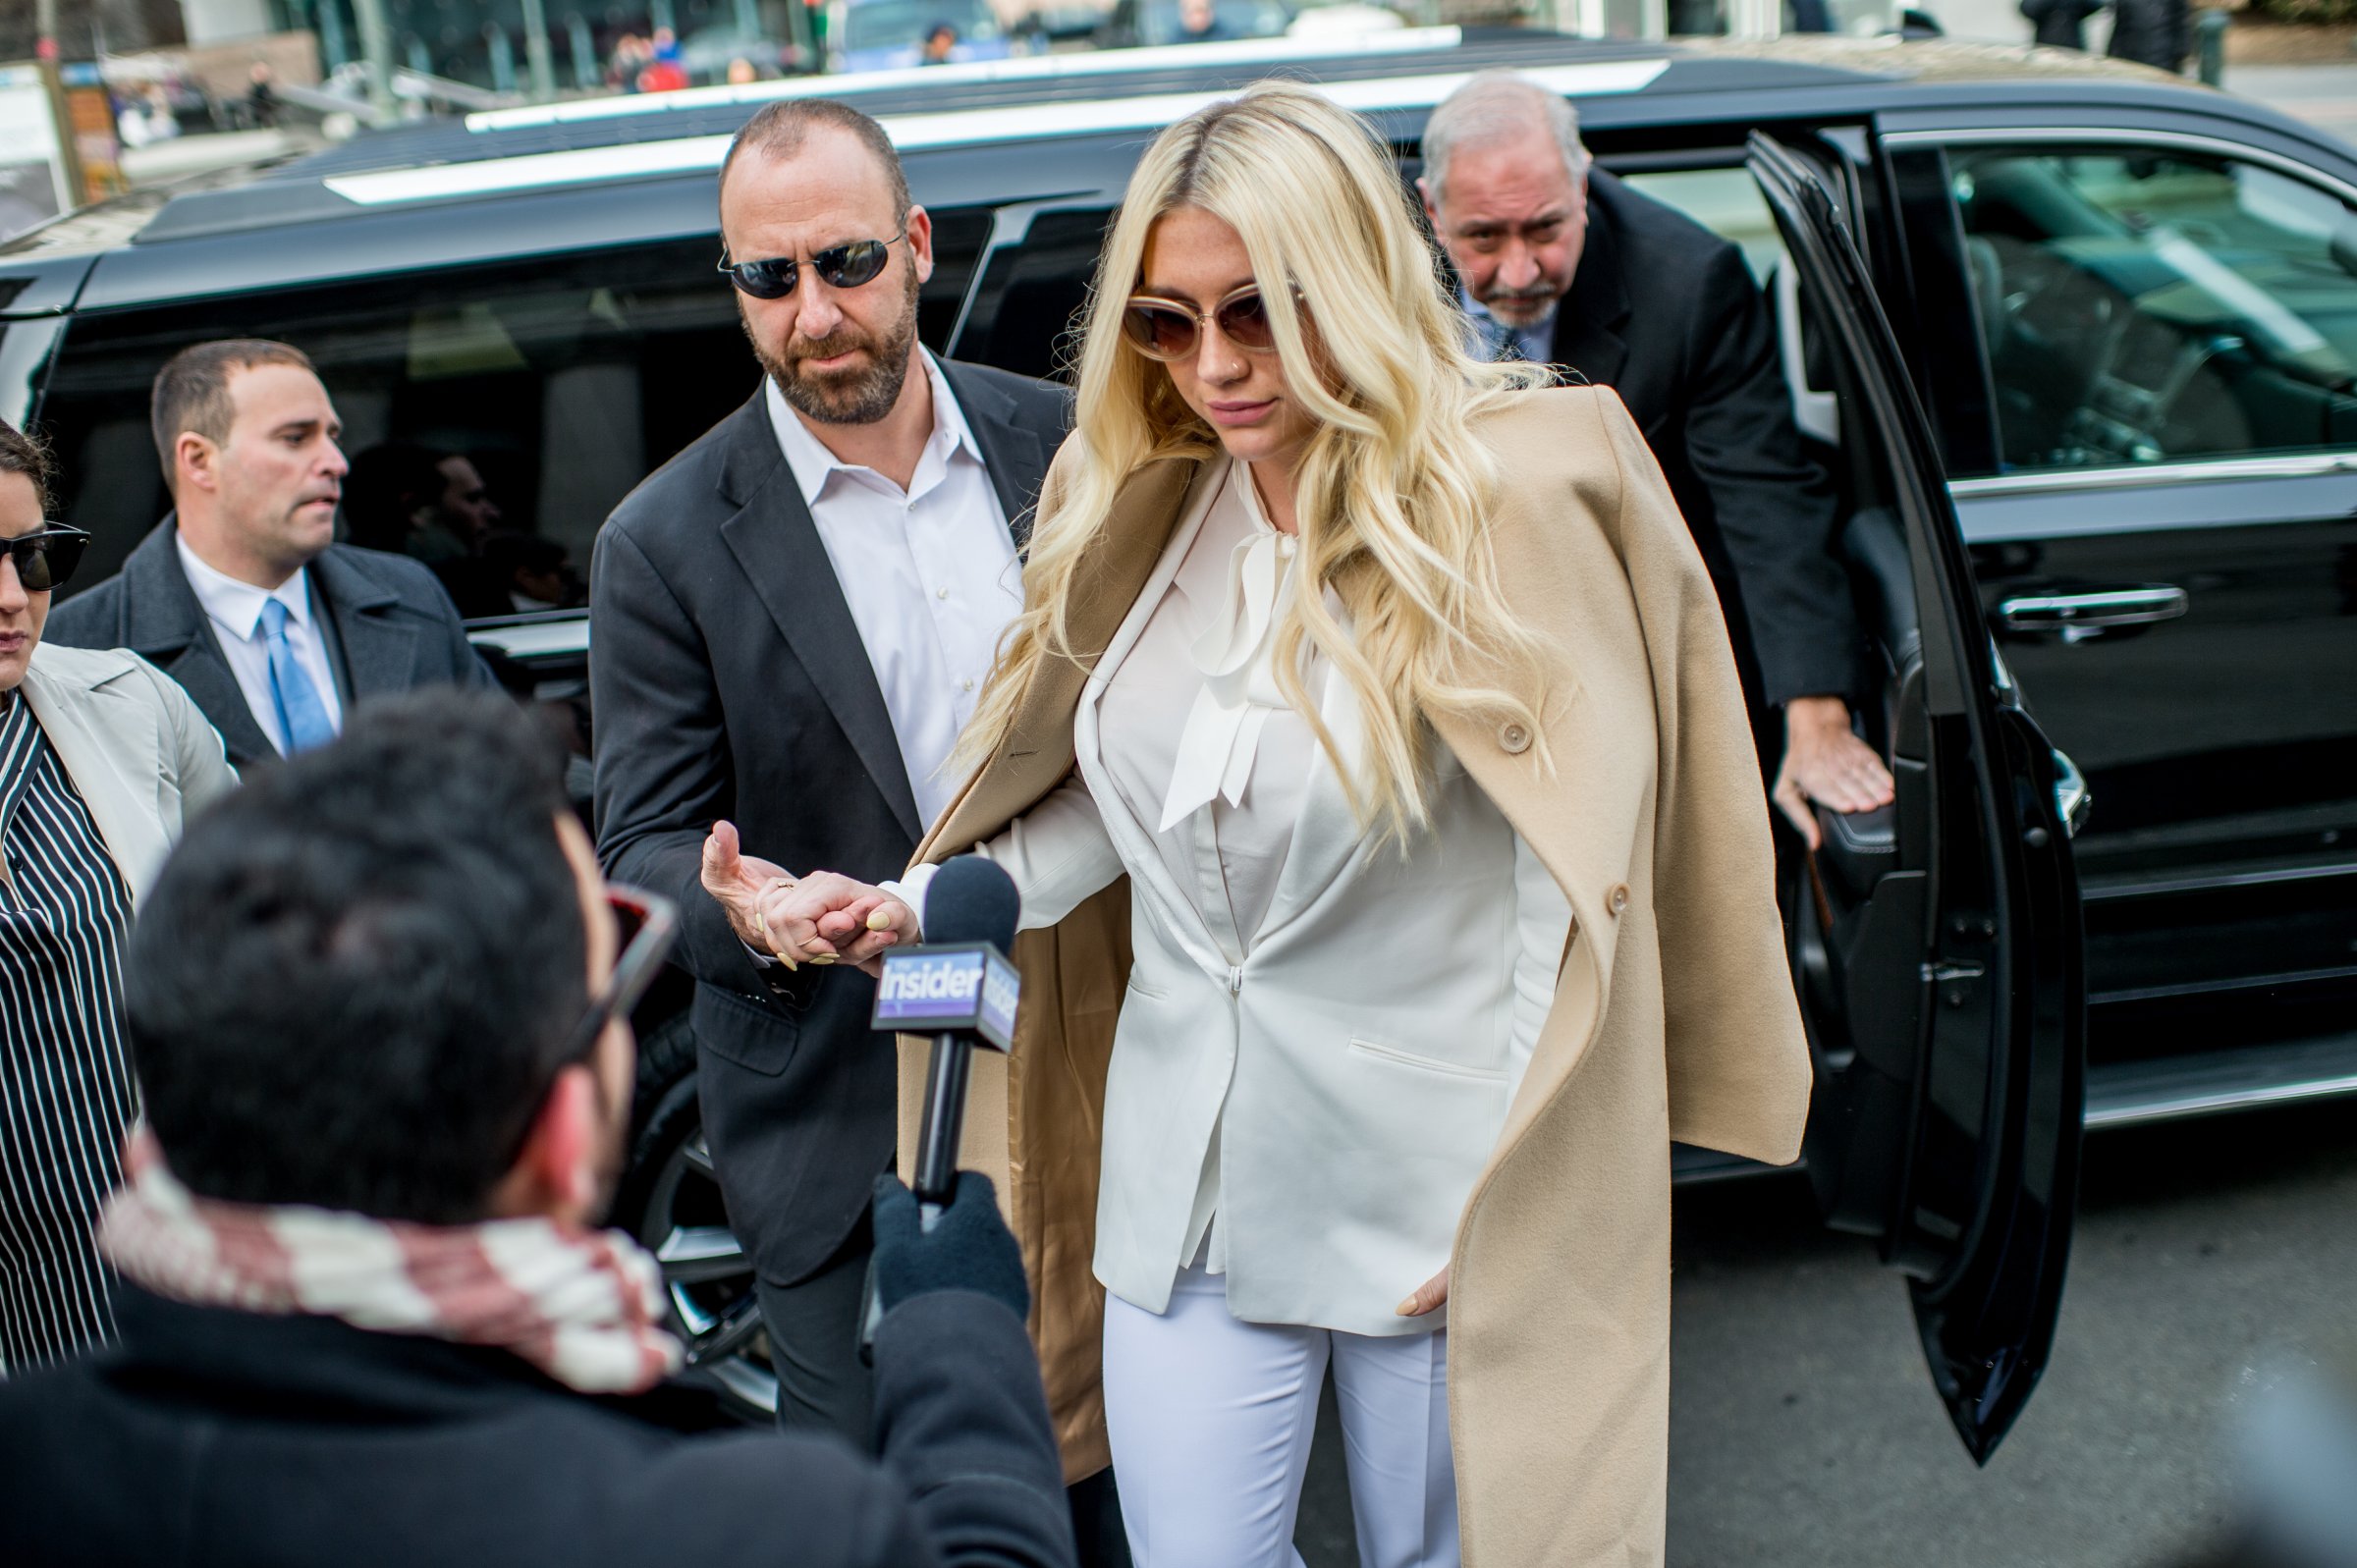 Kesha makes a court appearance as fans protest Sony Music Entertainment outside New York State Supreme Court on February 19, 2016 in New York City.